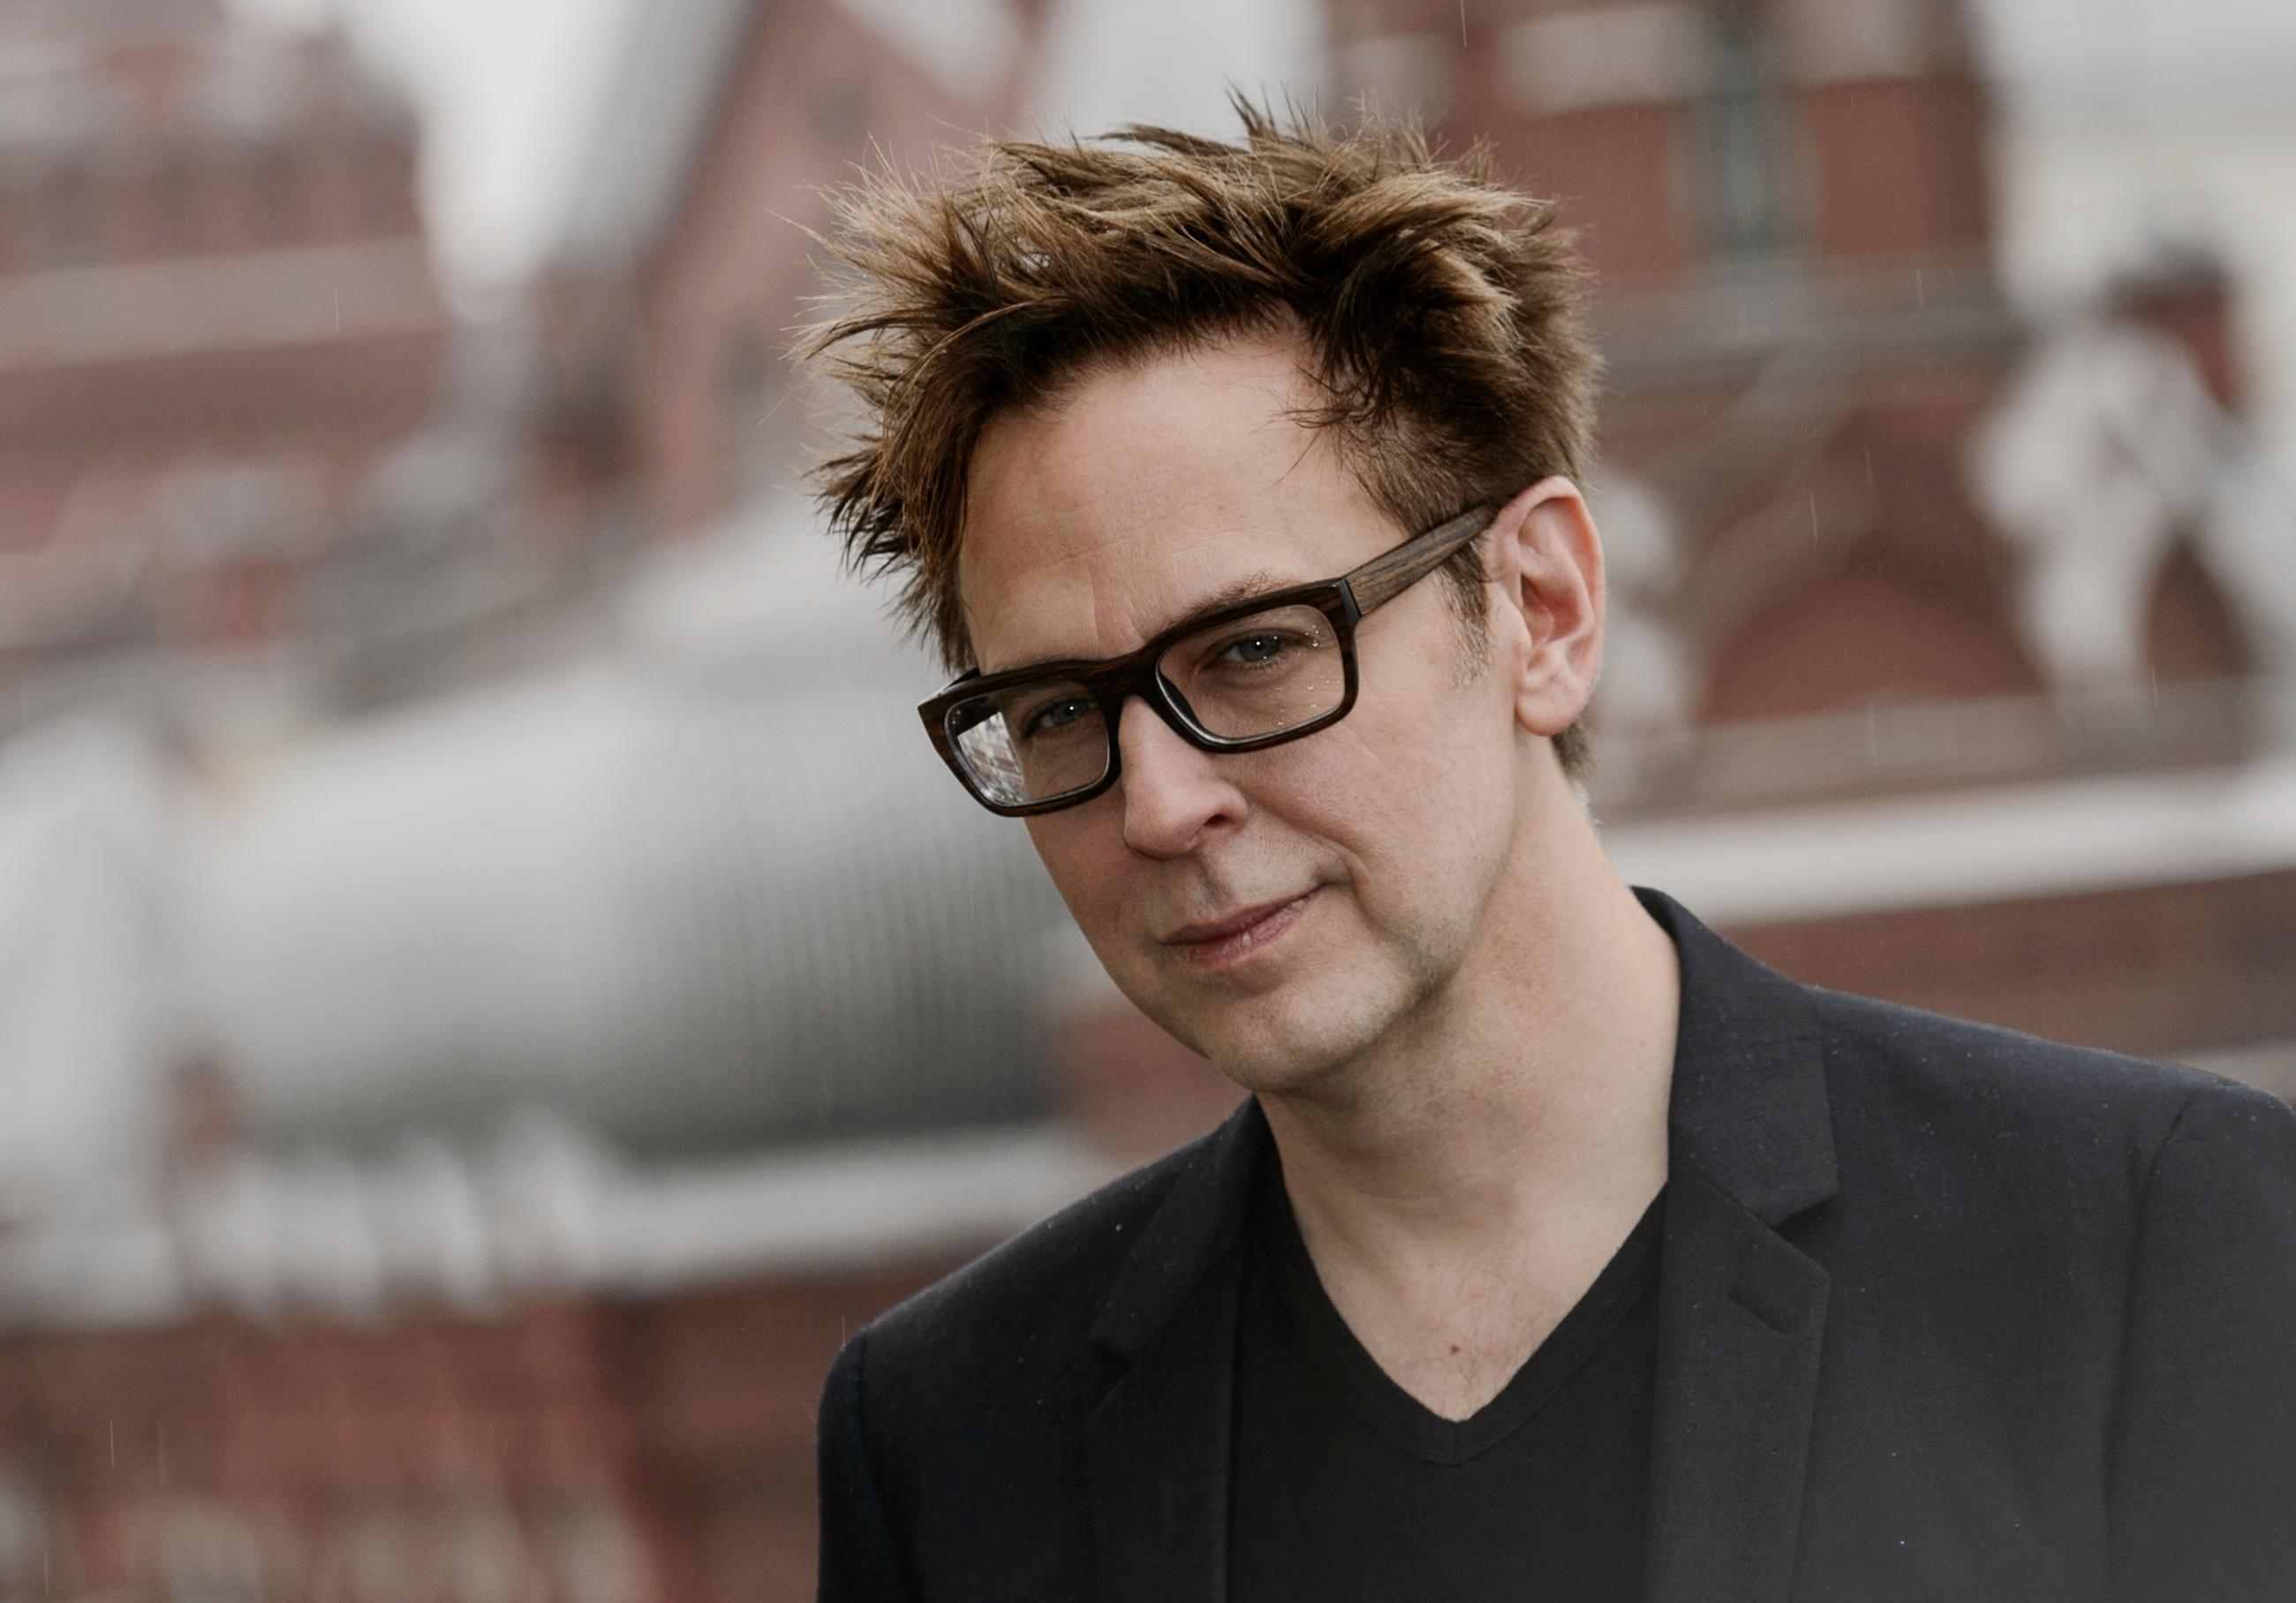 James Gunn Calls Jodie Foster's Fracking Opinion “Old Fashioned